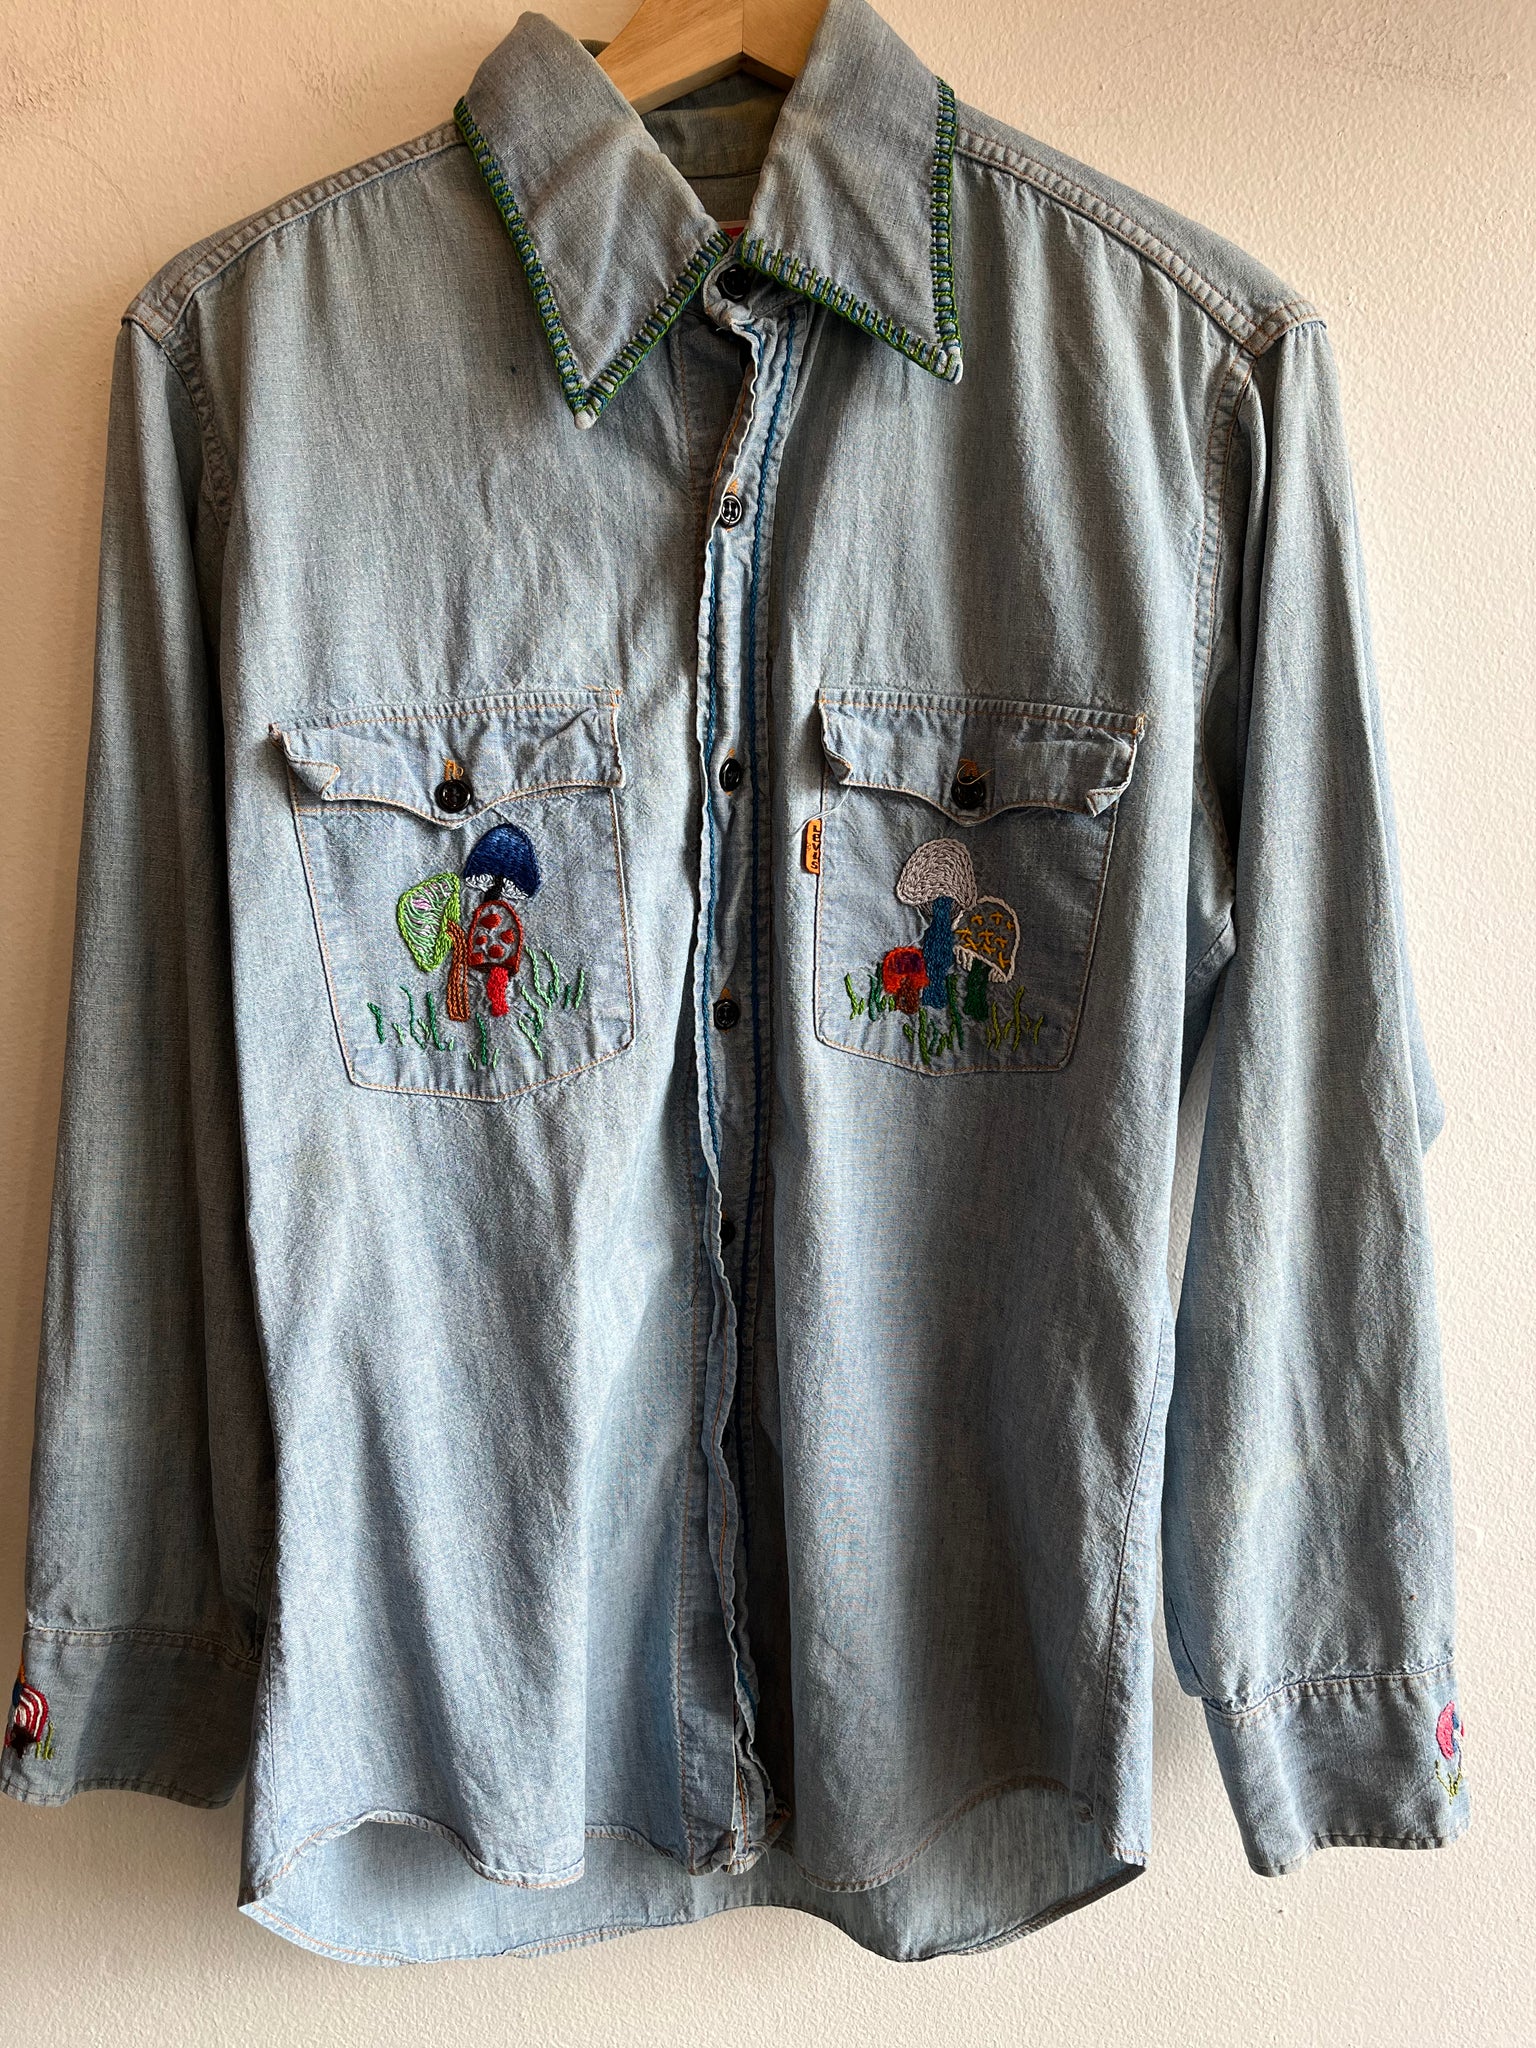 Vintage 1970’s Levi’s Embroidered Chambray shirt